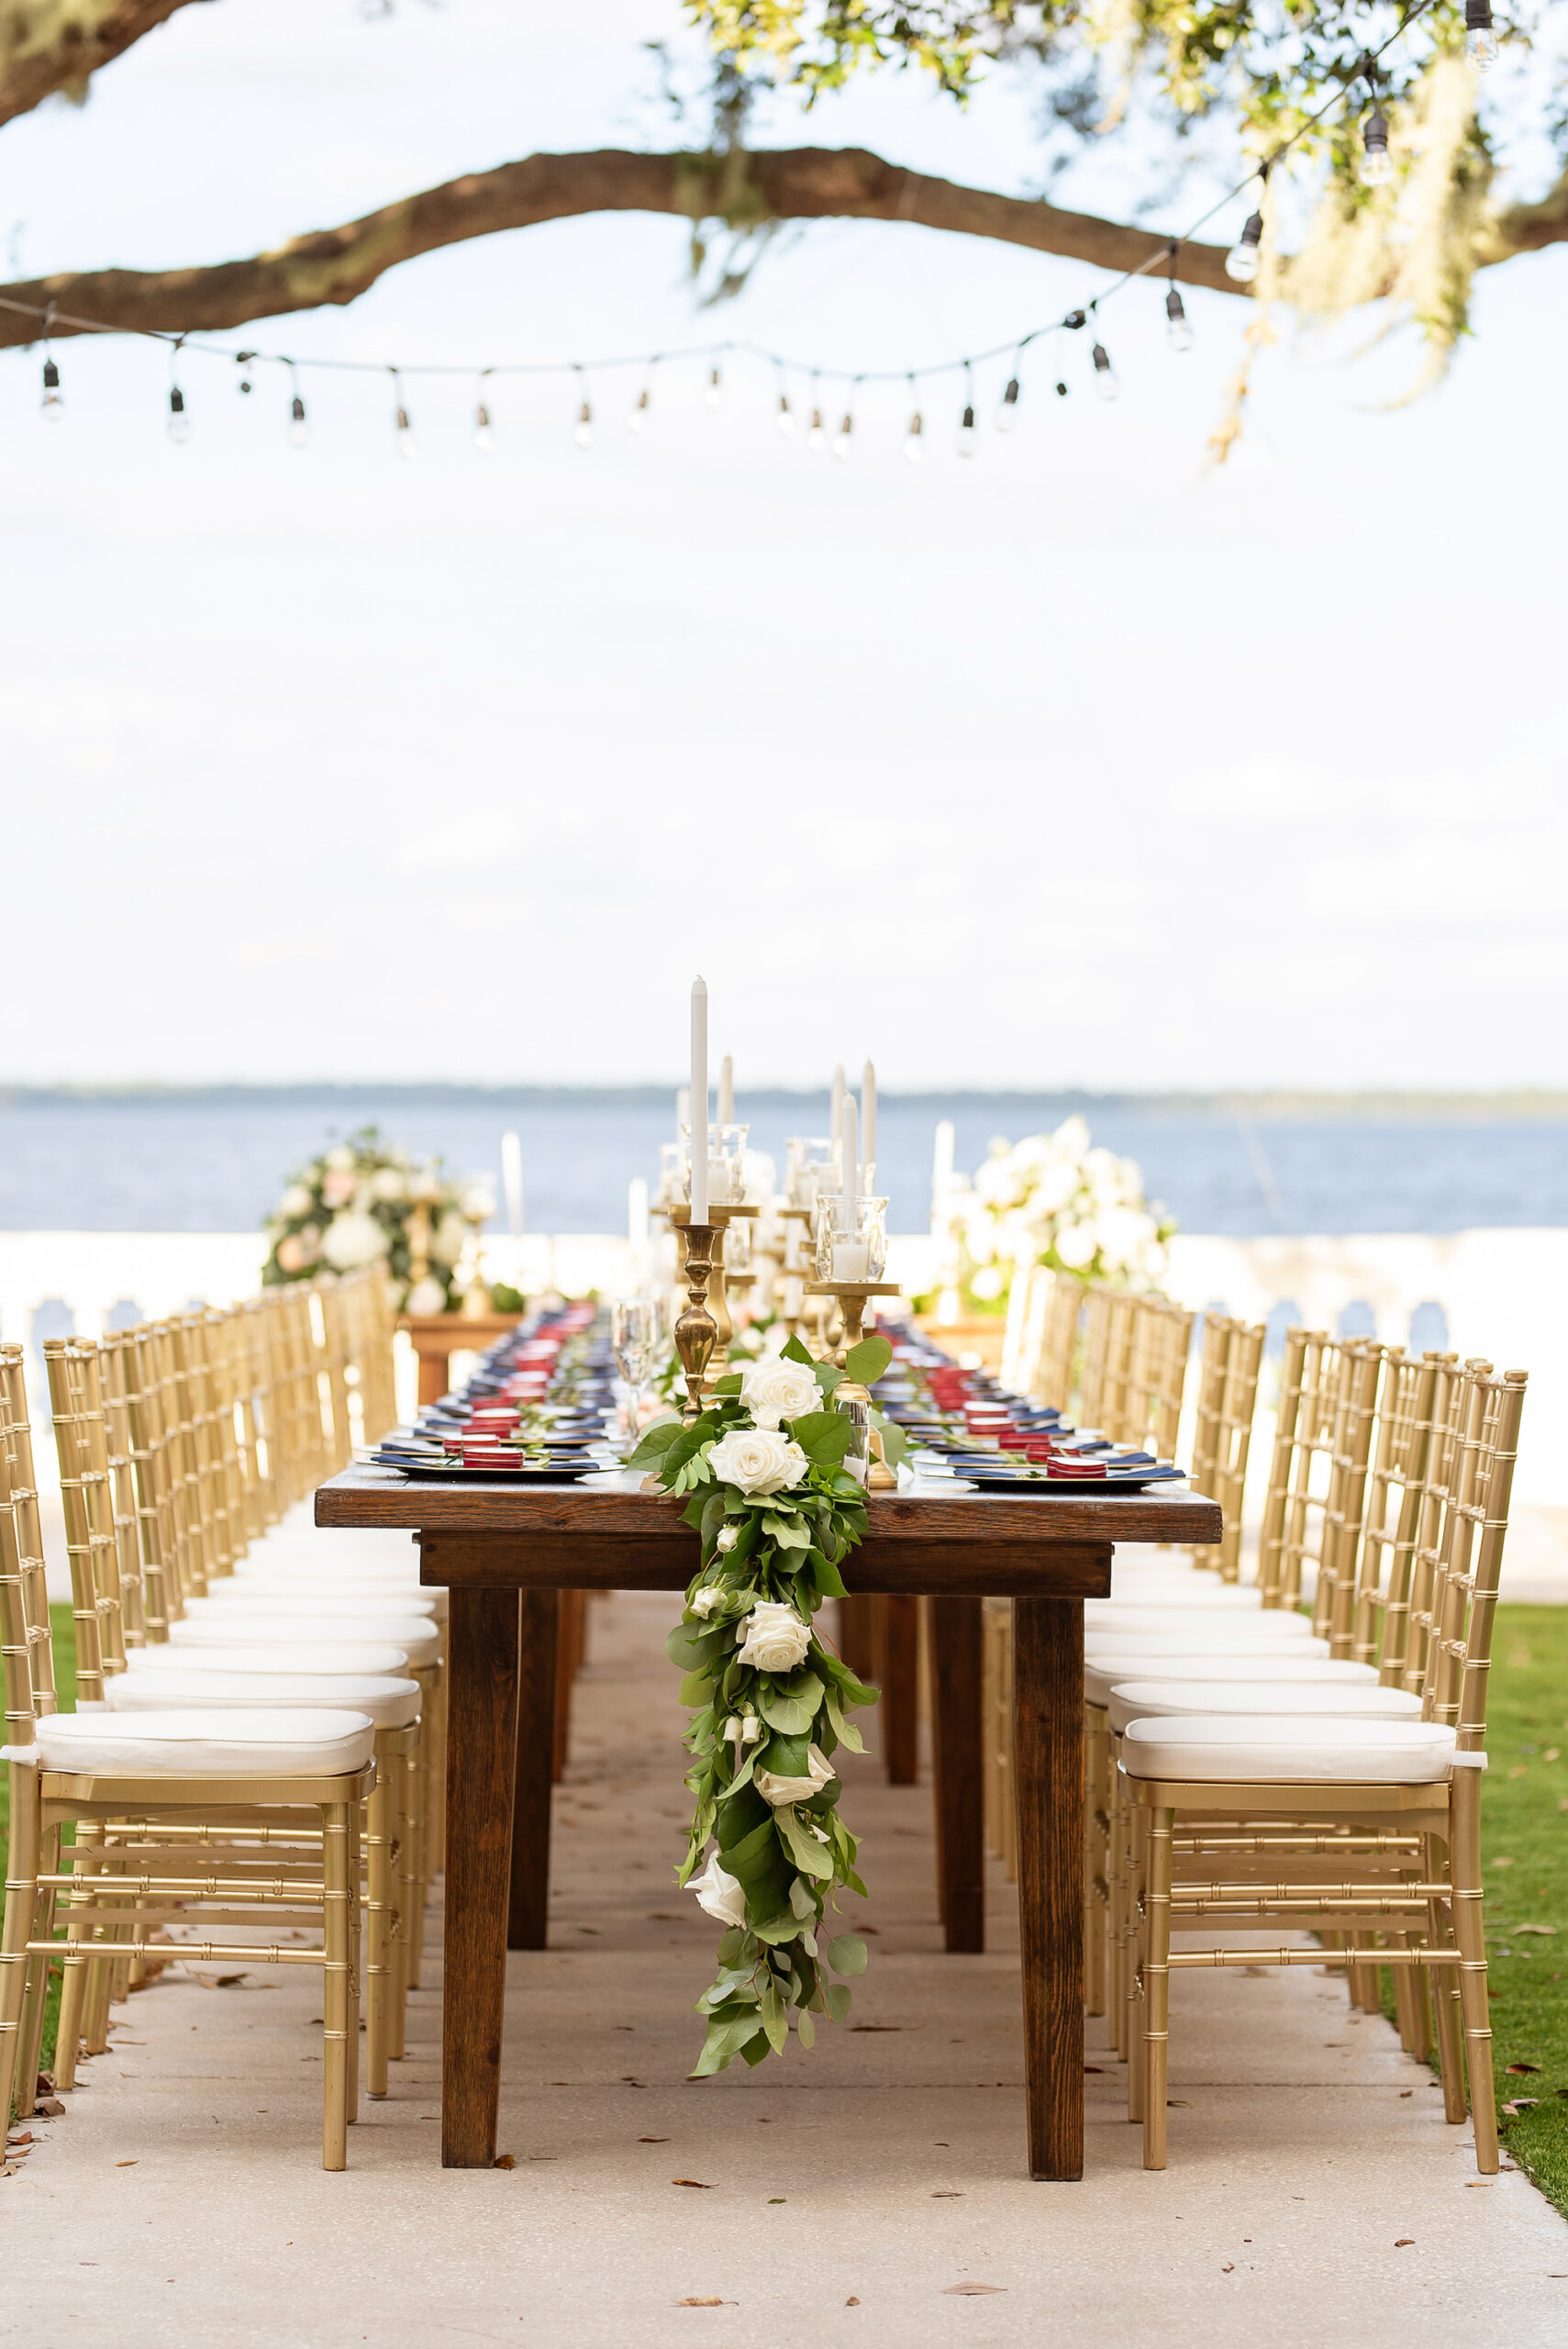 Italian-Inspired Wedding Decor Inspiration | Long Feasting Table for Intimate Wedding Reception | Gold Chiavari Chairs with Cushion | Cascading Rose and Eucalyptus Greenery Centerpiece Ideas